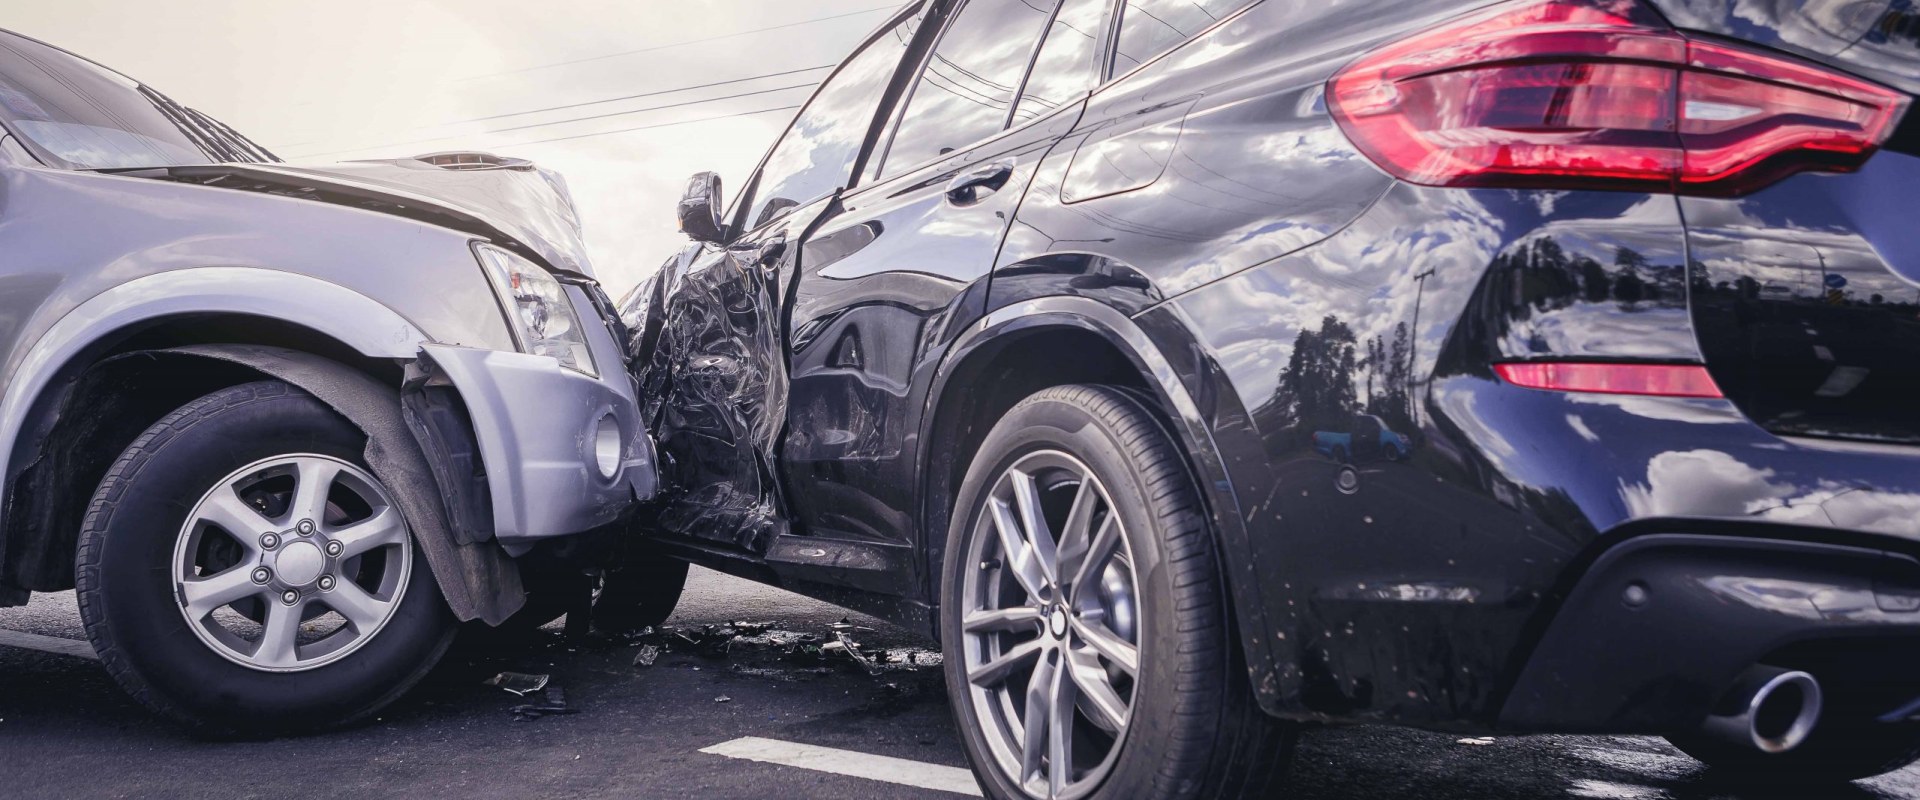 What to Do After a Car Accident: 8 Crucial Steps